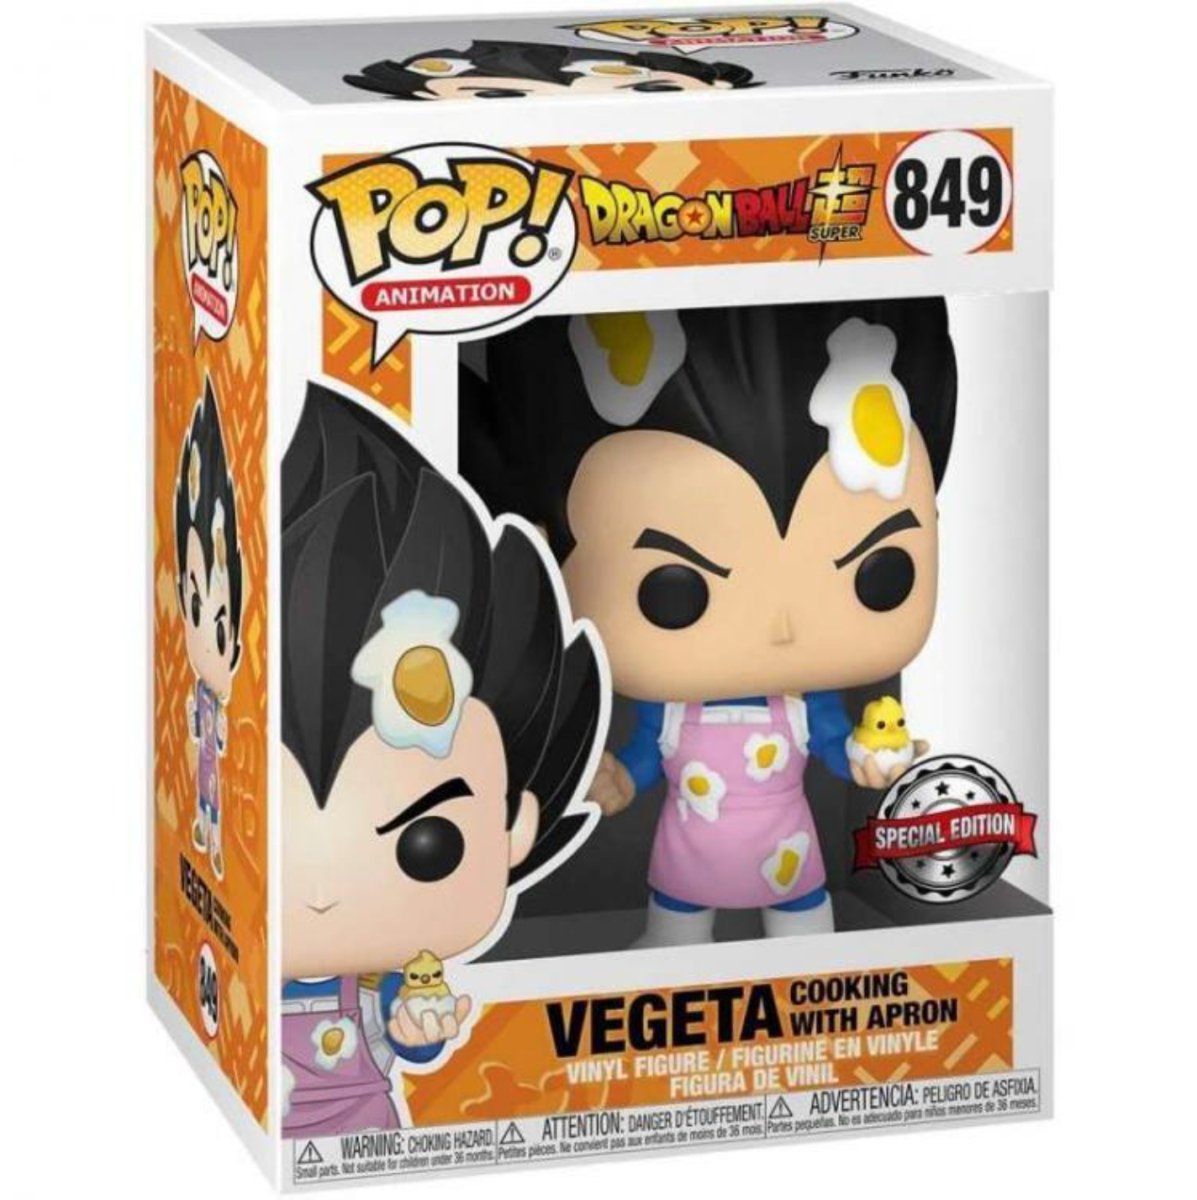 Dragon Ball Z Super - Vegeta Cooking with Apron (Special Edition) #849 - Funko Pop! Vinyl Anime - Persona Toys